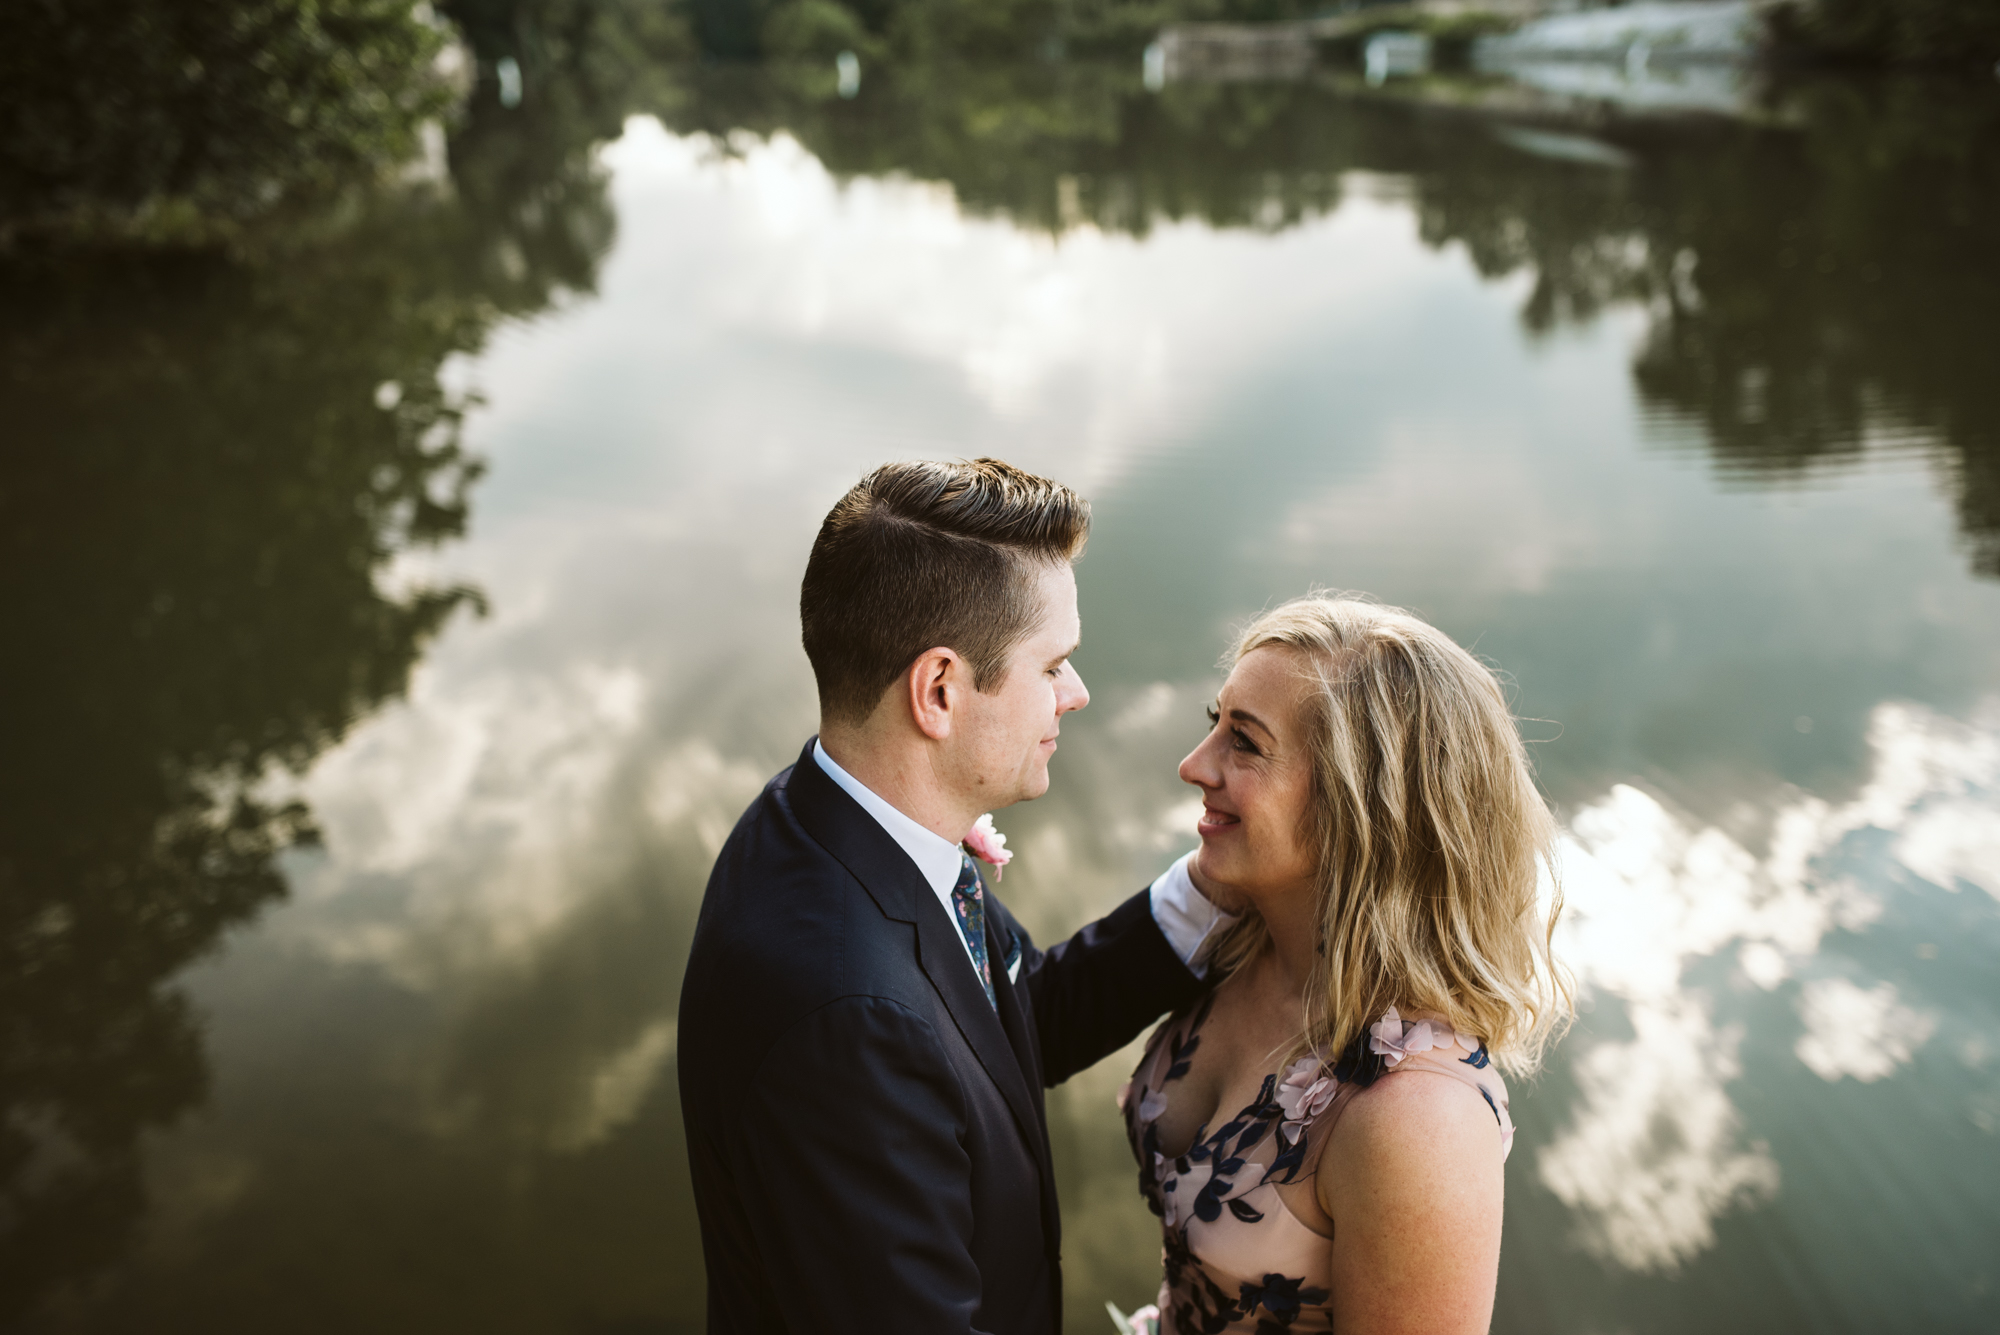 Pop-up Ceremony, Outdoor Wedding, Casual, Simple, Lake Roland, Baltimore, Maryland Wedding Photographer, Laid Back, Bride and Groom Waterfront Portrait, Intimate Moment